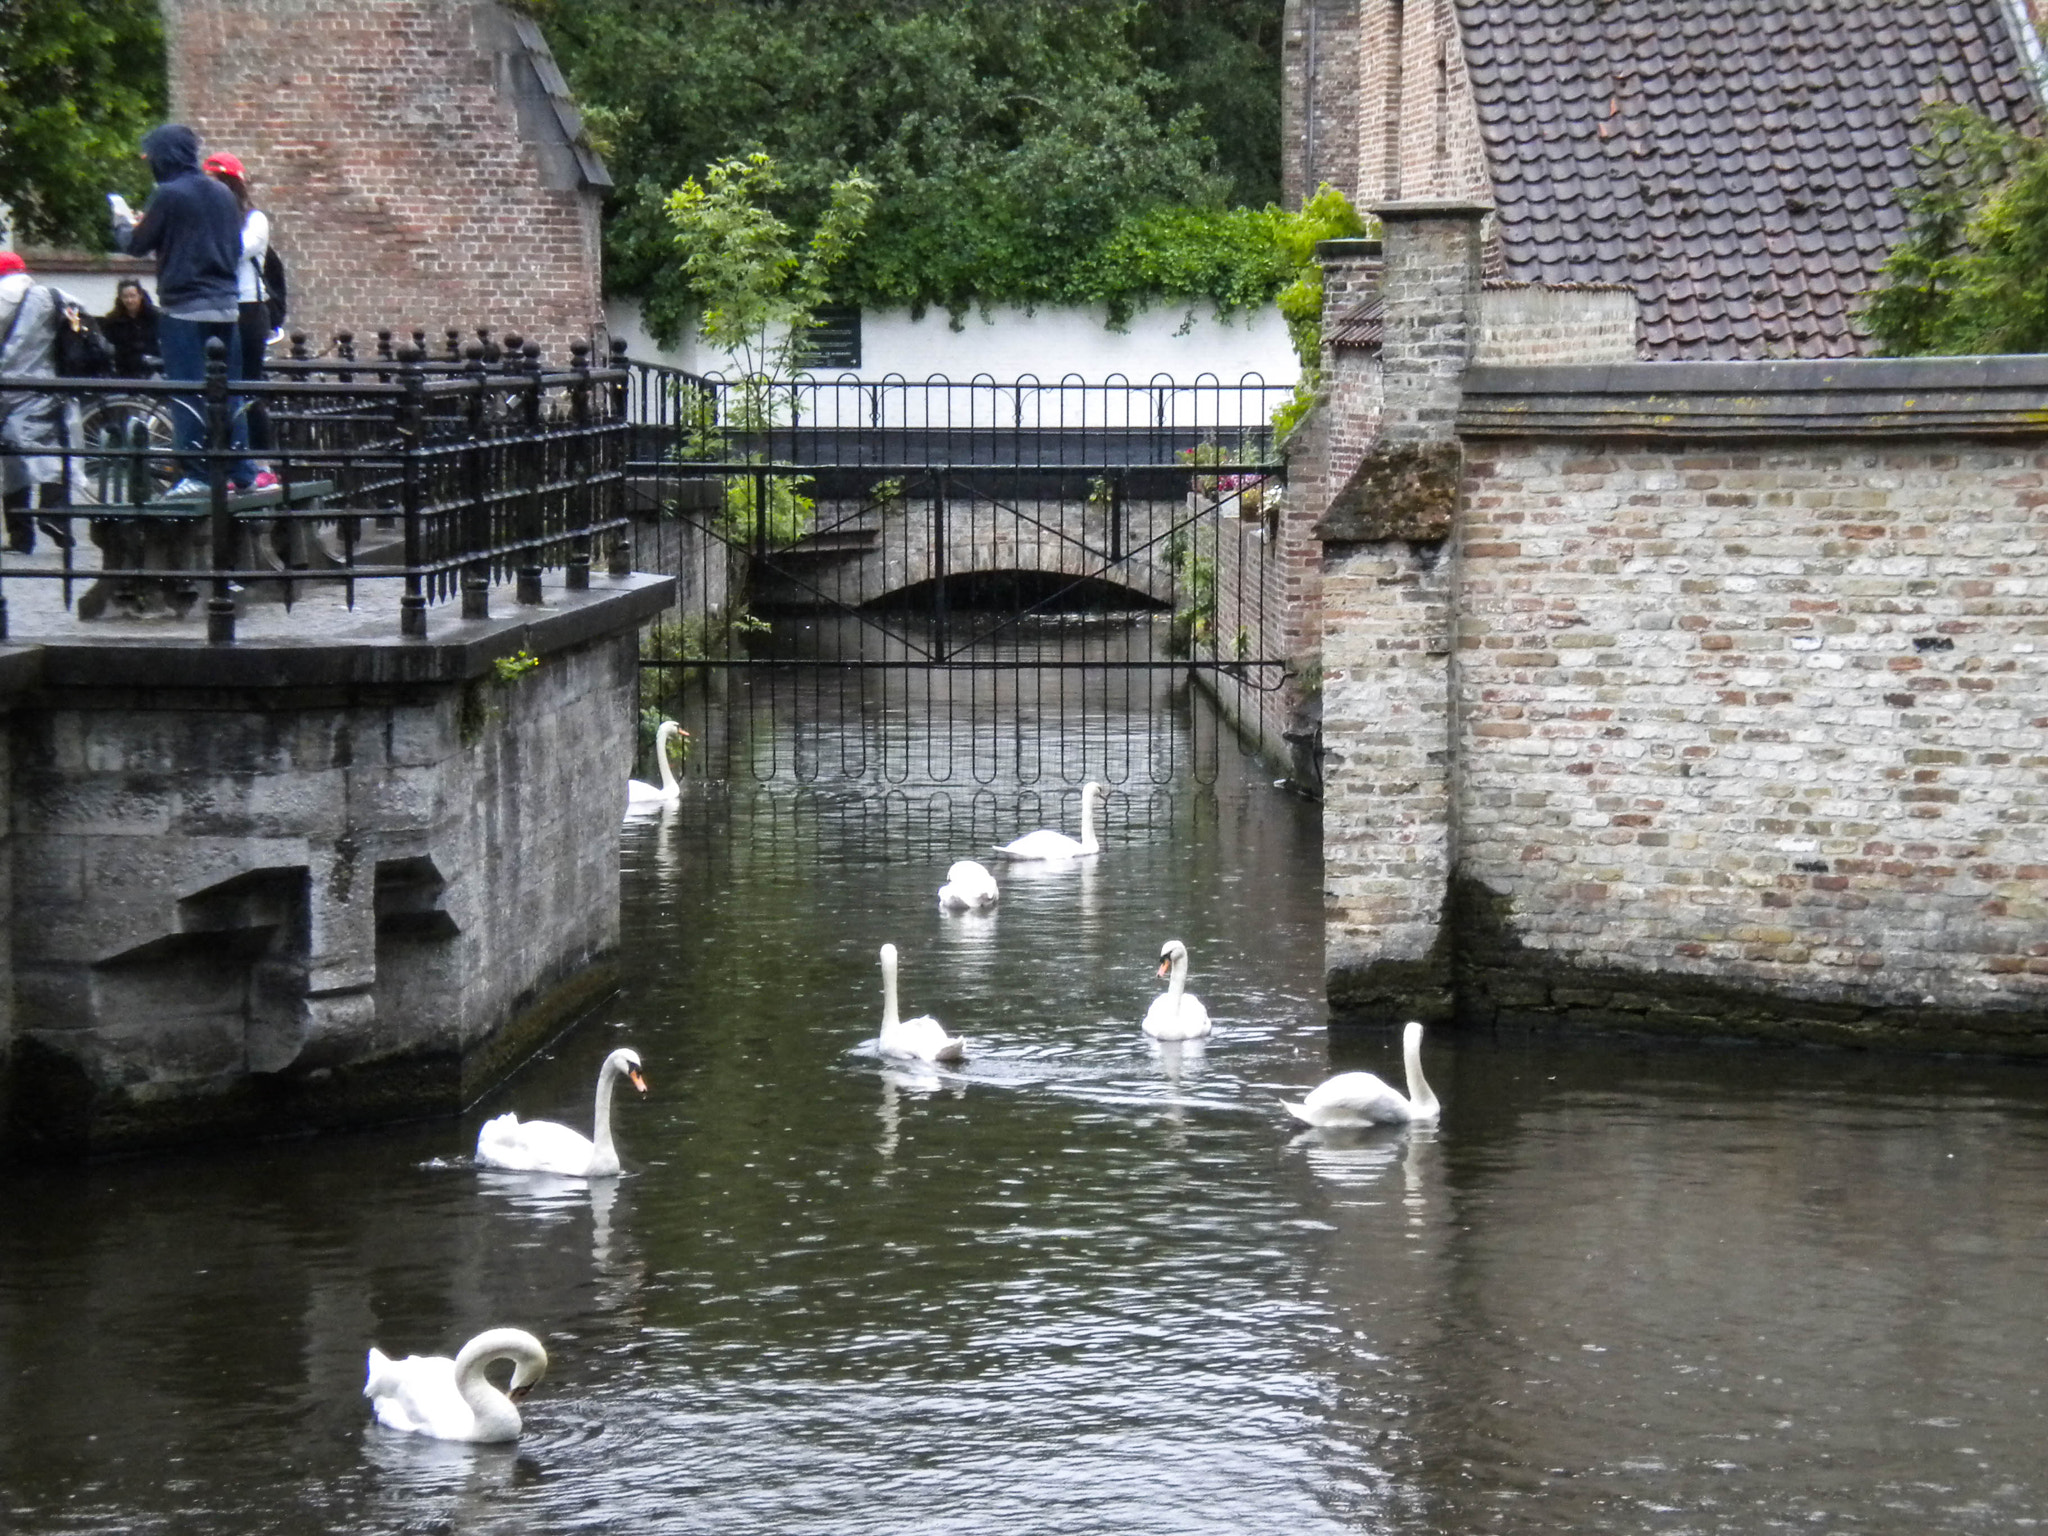 Nikon COOLPIX S225 sample photo. Minnewater lake (bruges) photography